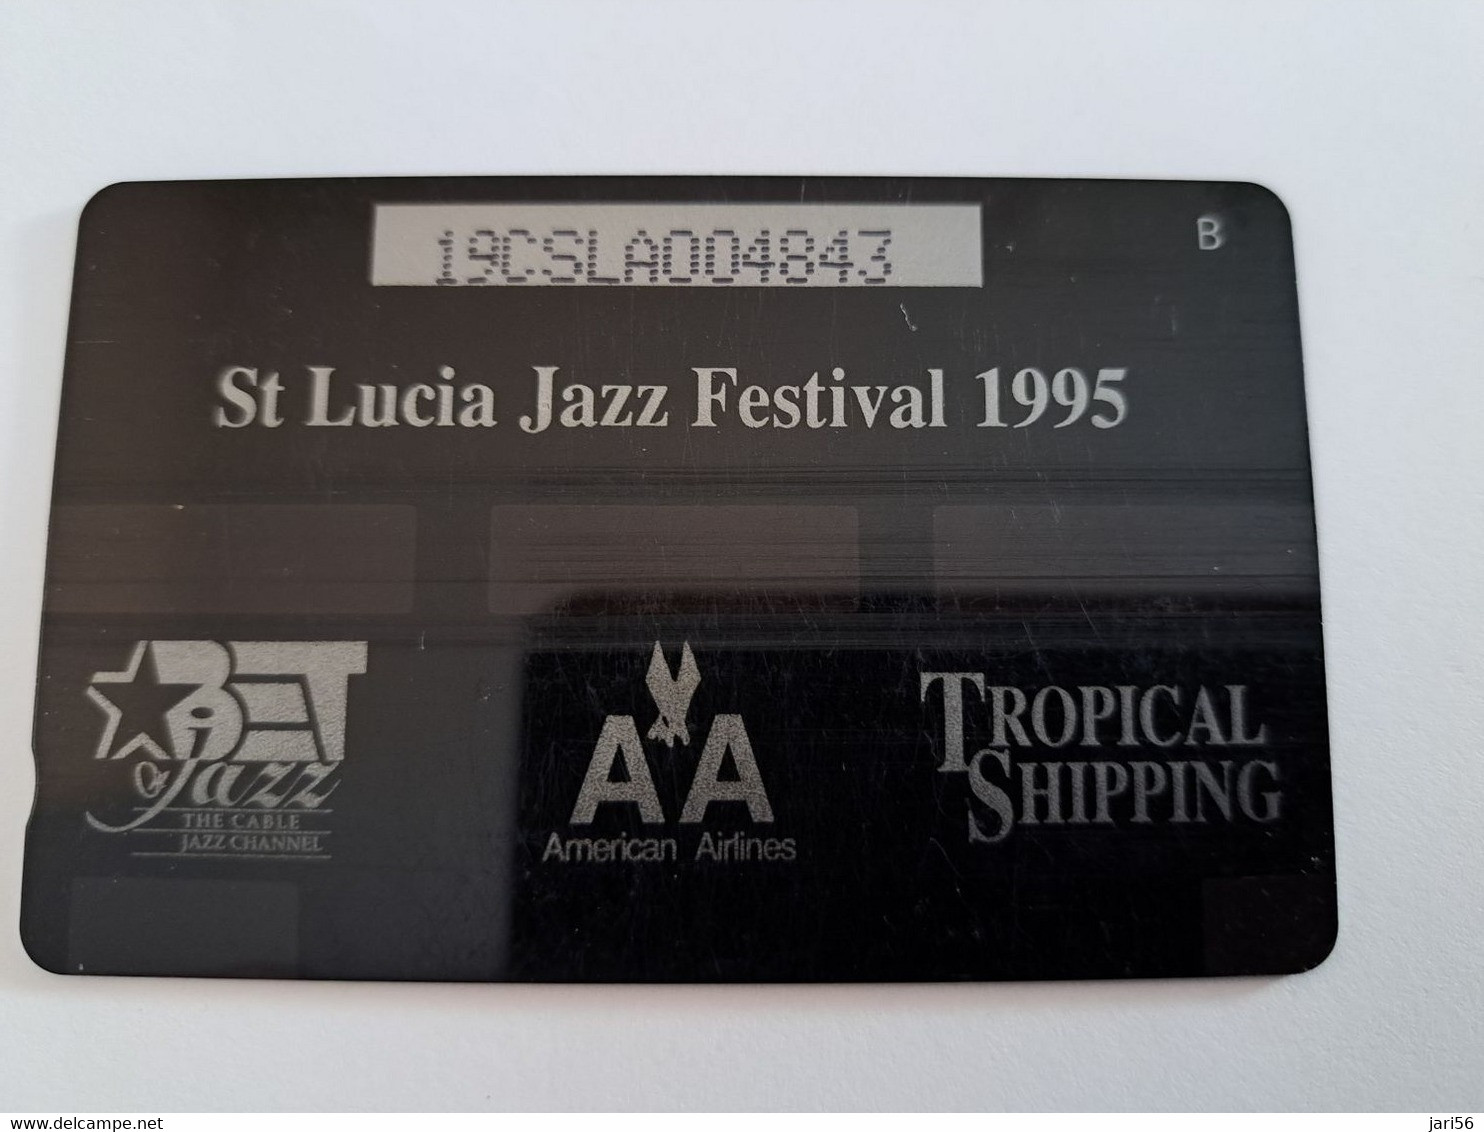 ST LUCIA    $ 20   CABLE & WIRELESS  STL-19A  19CSLA      JAZZ FESTIVAL 1995  Fine Used Card ** 10880** - St. Lucia